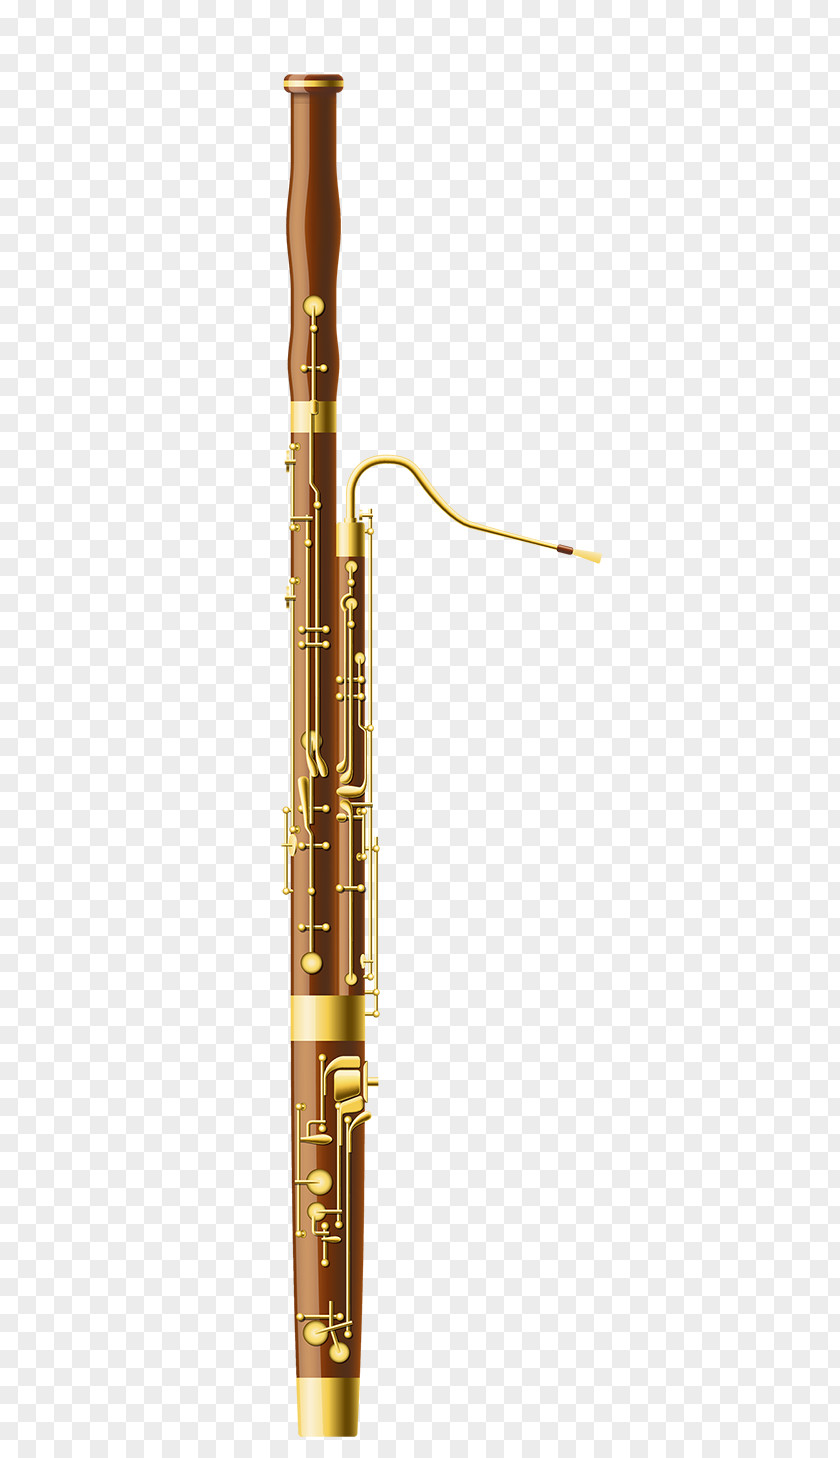 Musical Instruments Bassoon Instrument Violin Piano PNG